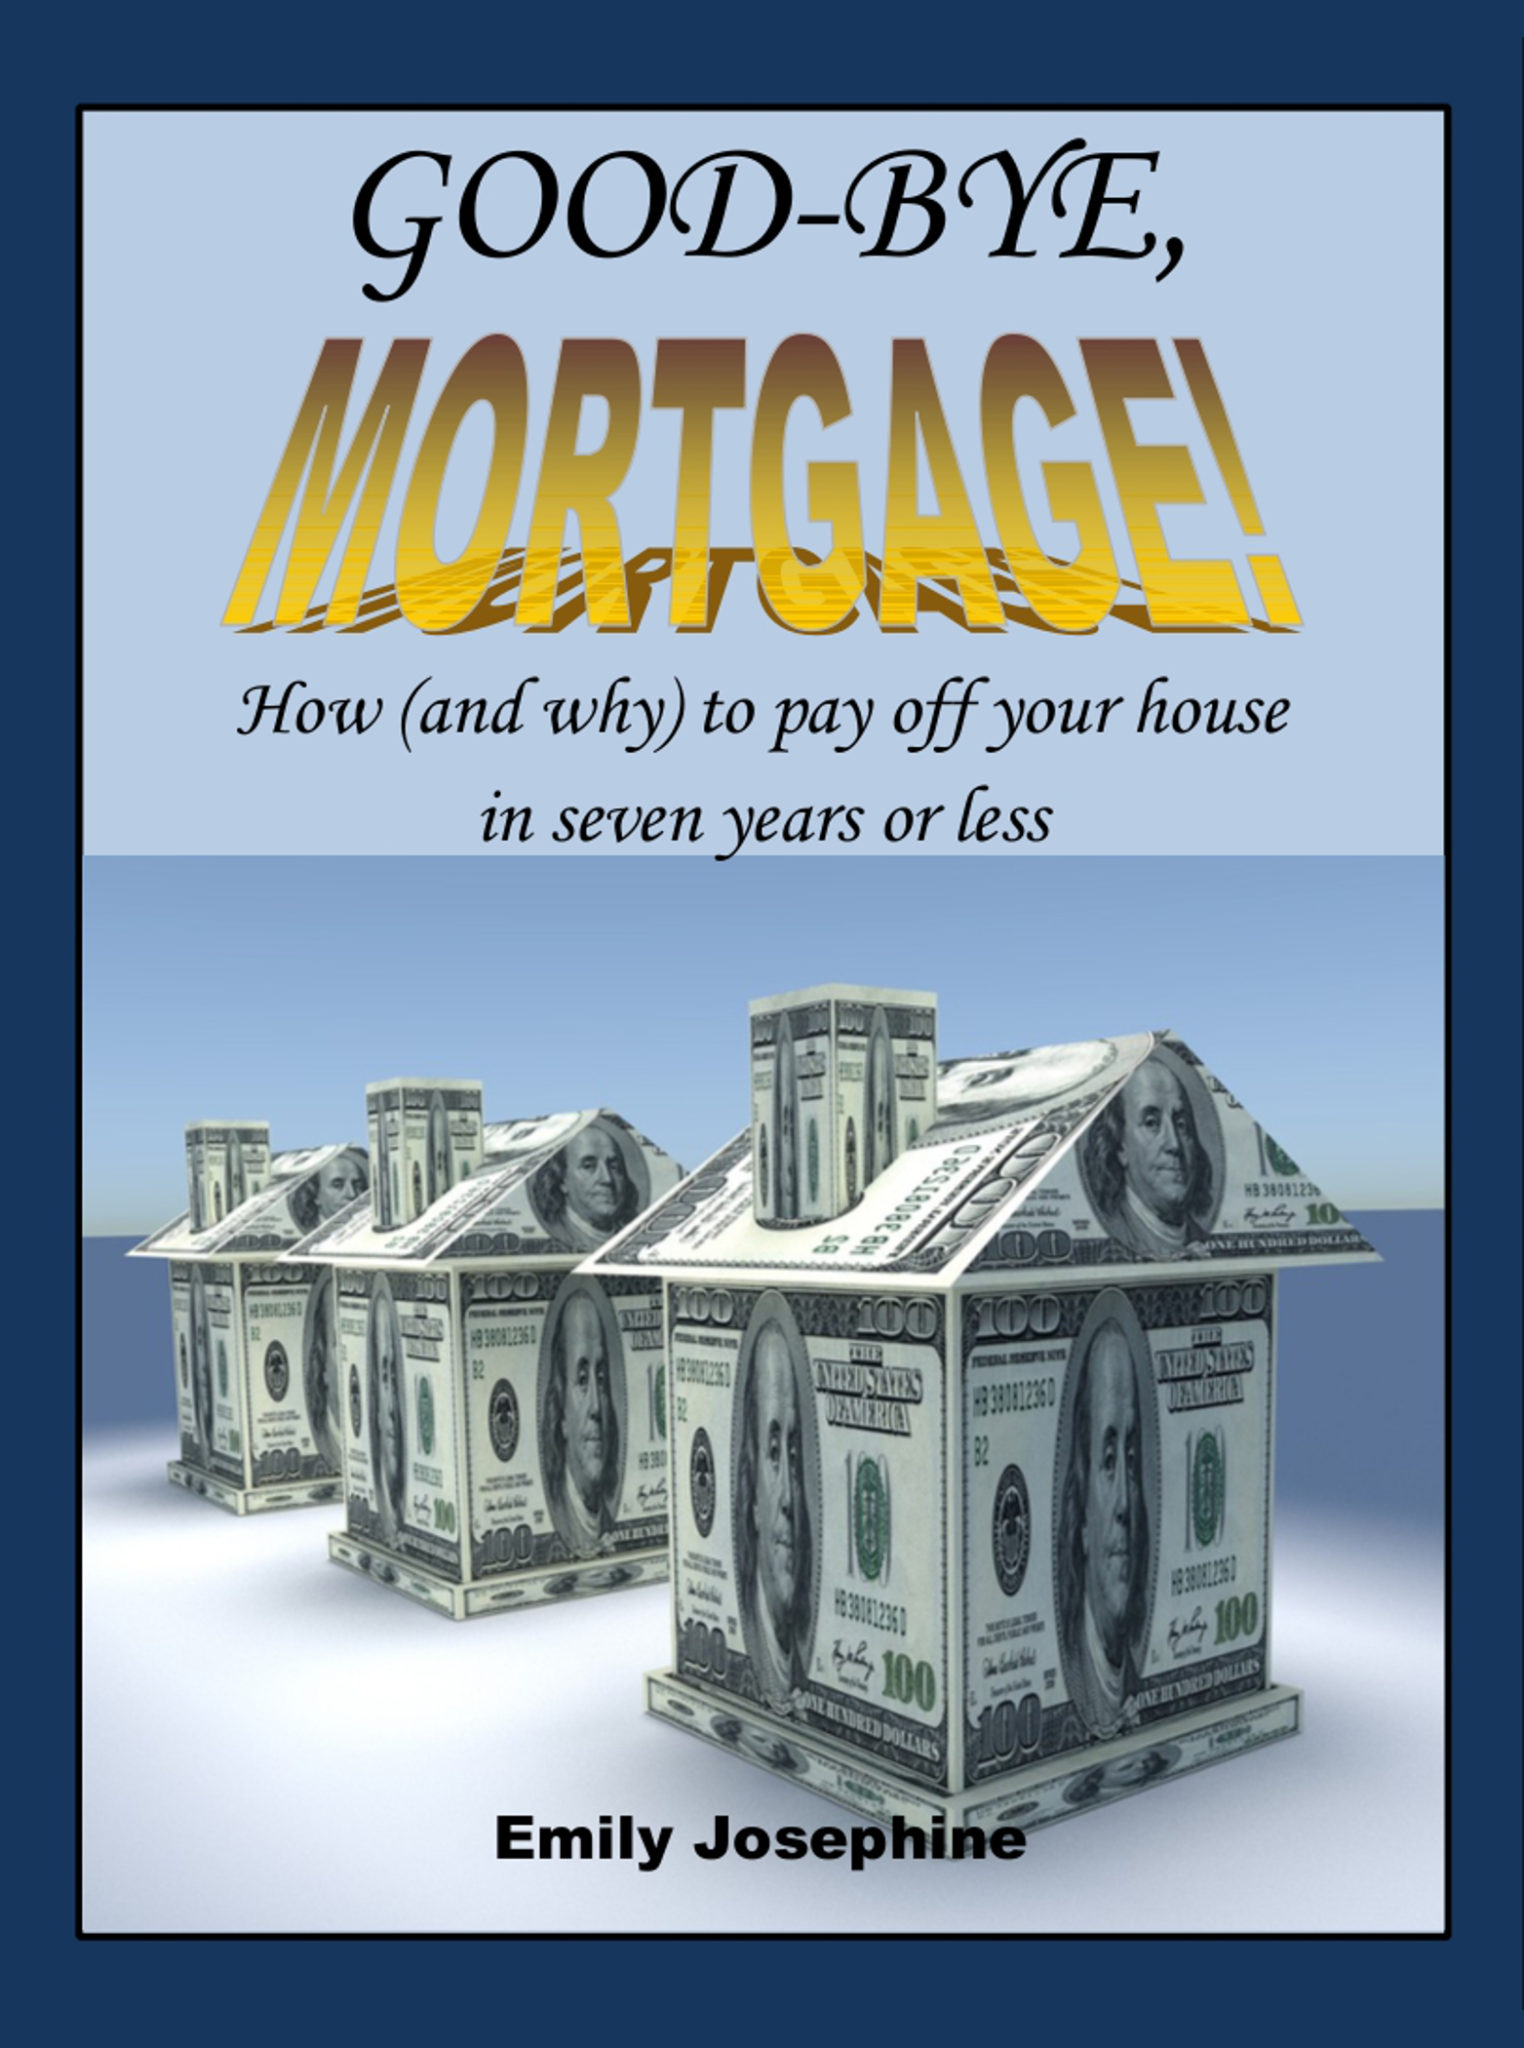 FREE: Good-Bye, Mortgage: How (And Why) To Pay Off Your House In Seven Years Or Less by Emily Josephine